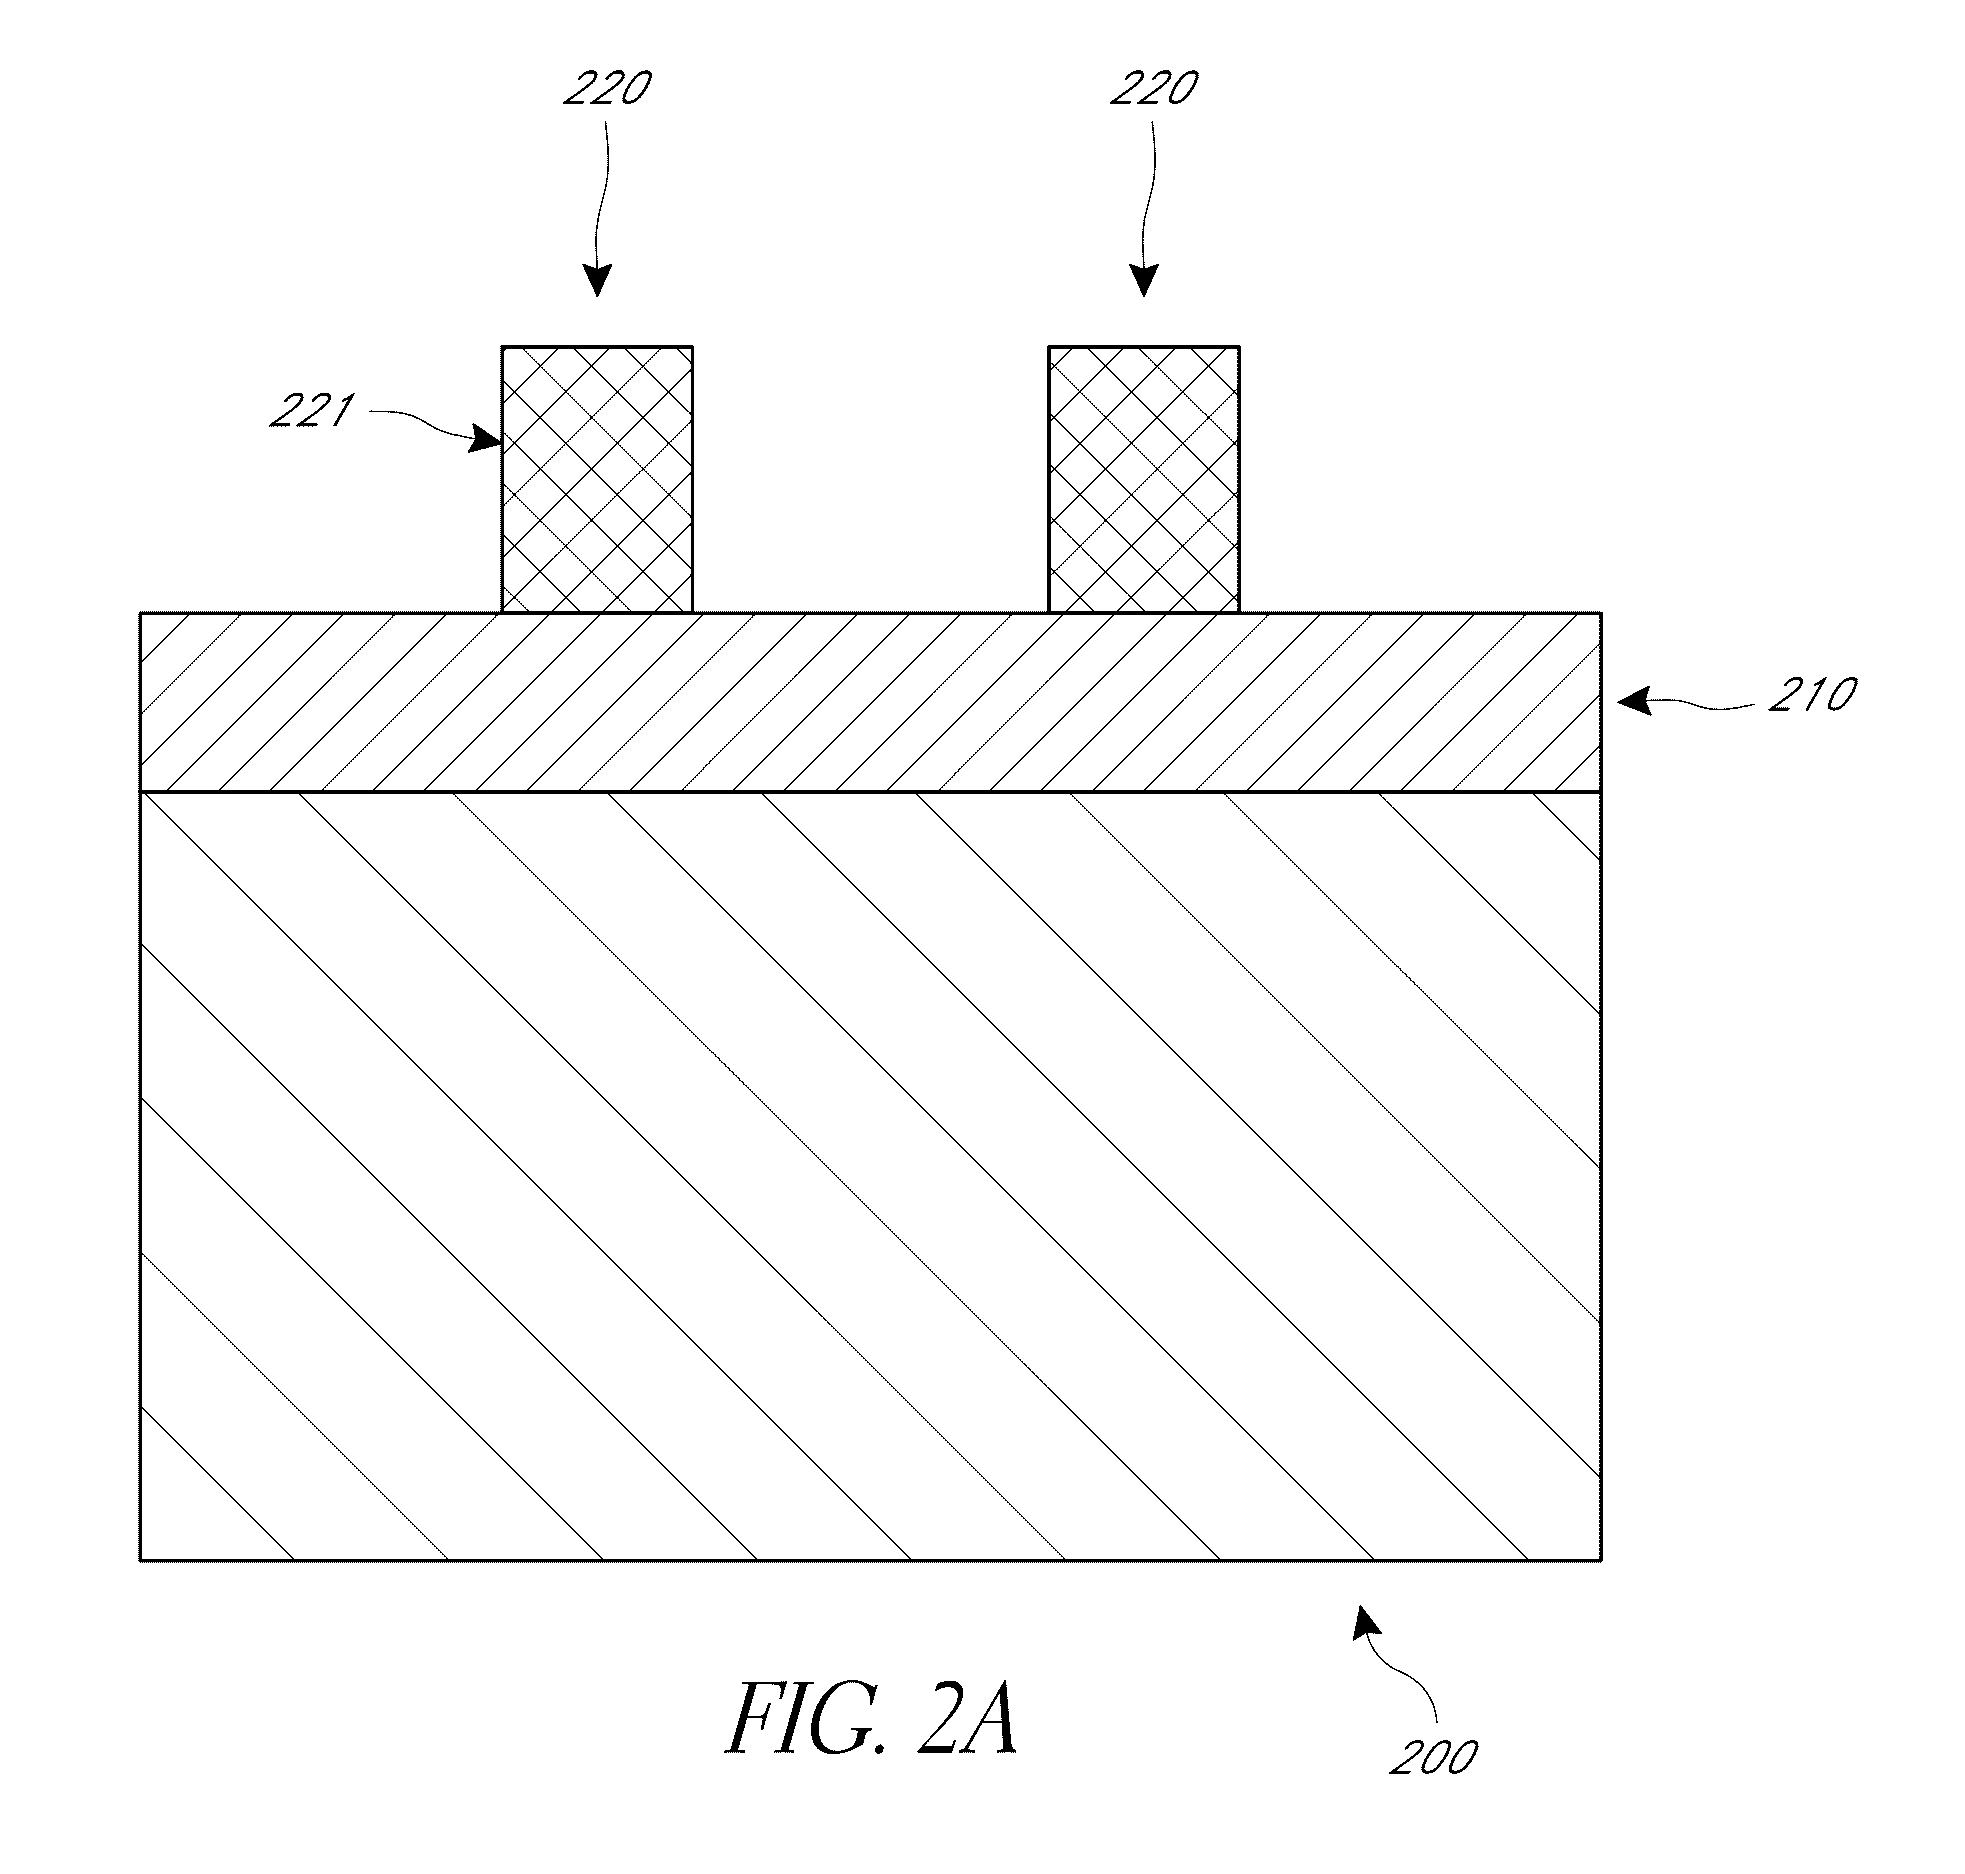 Process for deposition of titanium oxynitride for use in integrated circuit fabrication